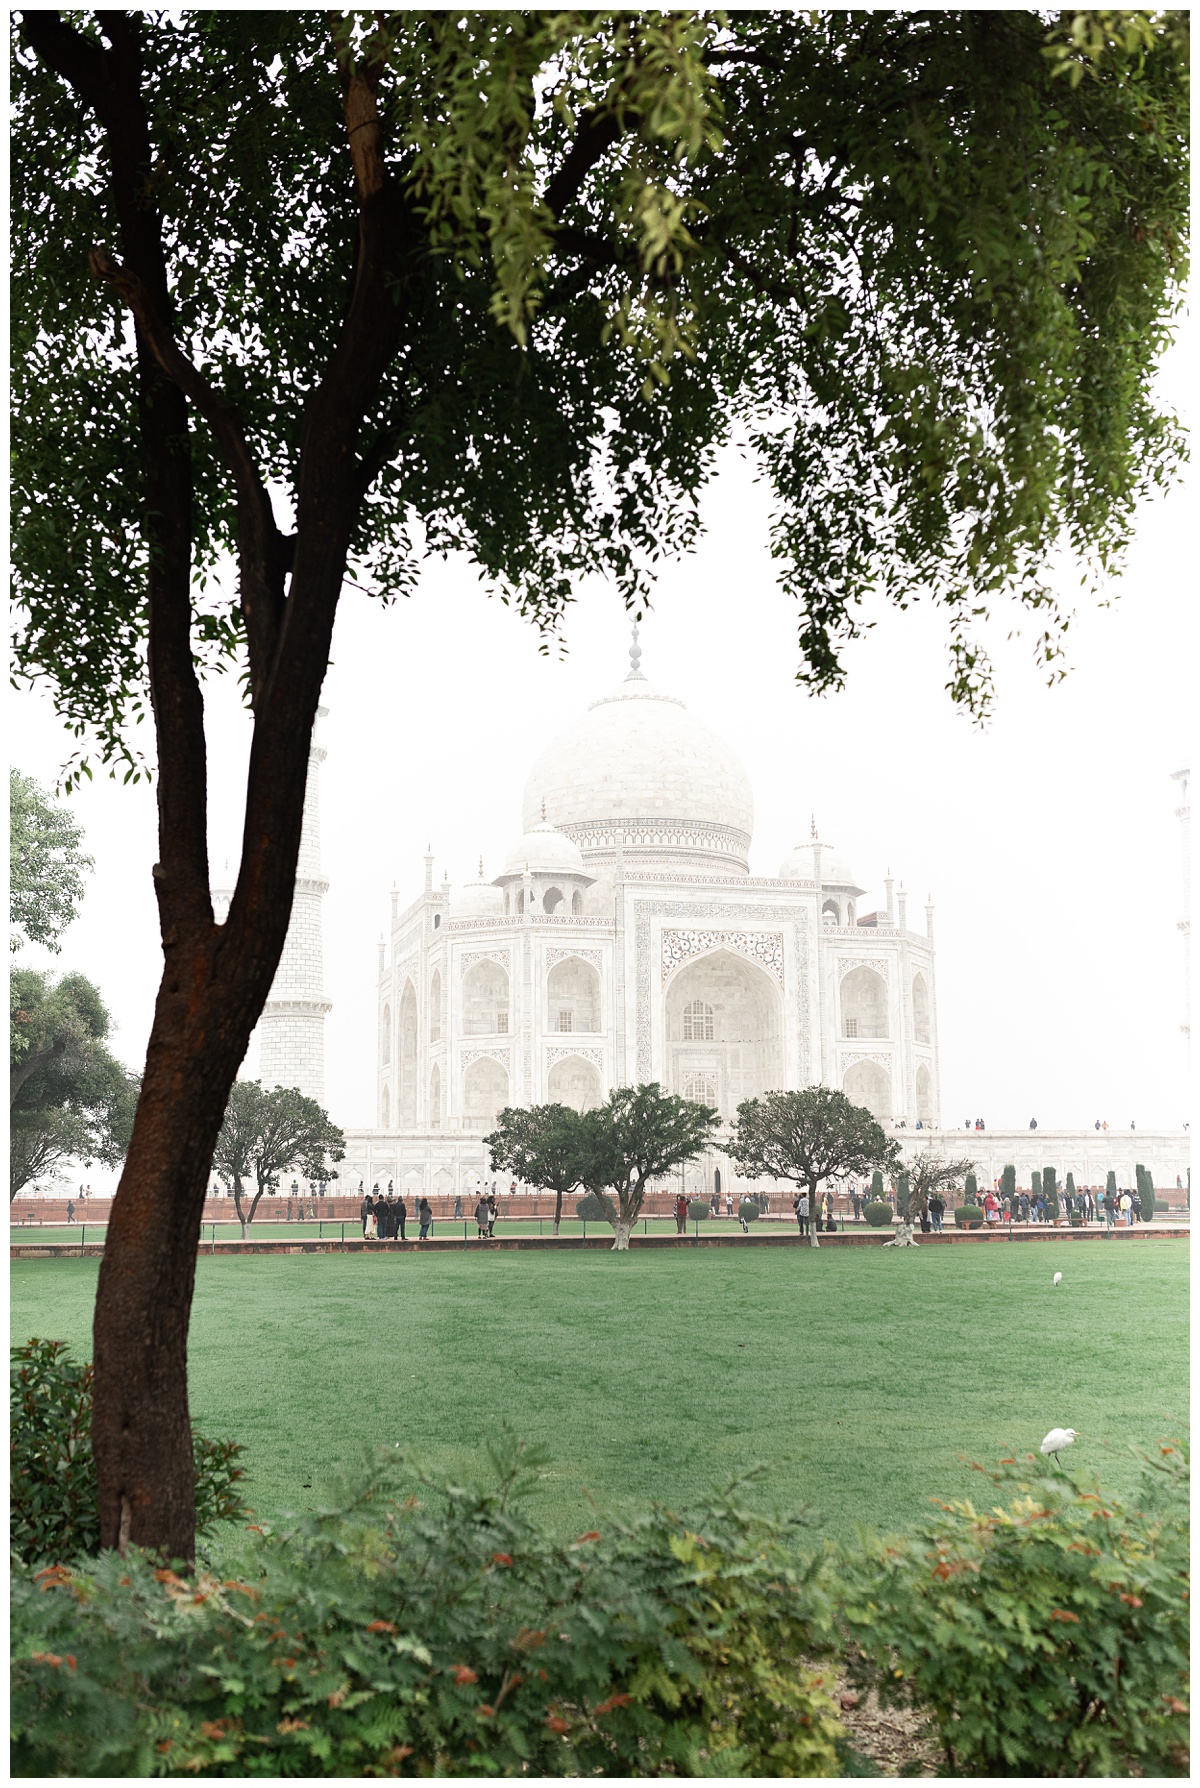 view of the taj mahal from the grounds